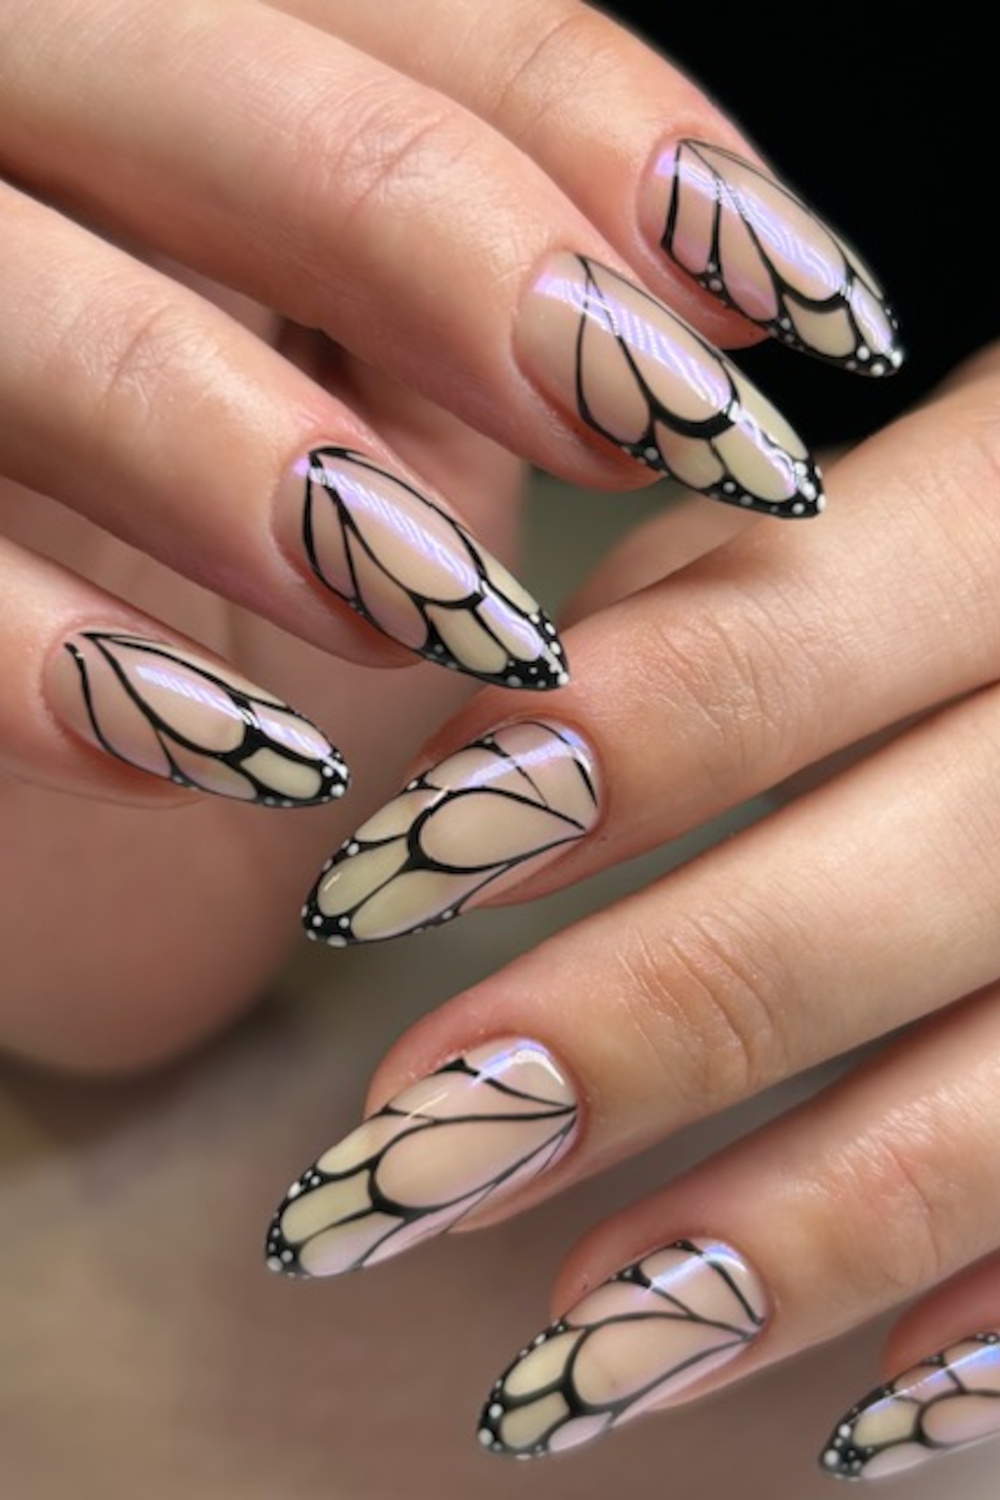 This Spring Manicure Has Us All In A Flutter